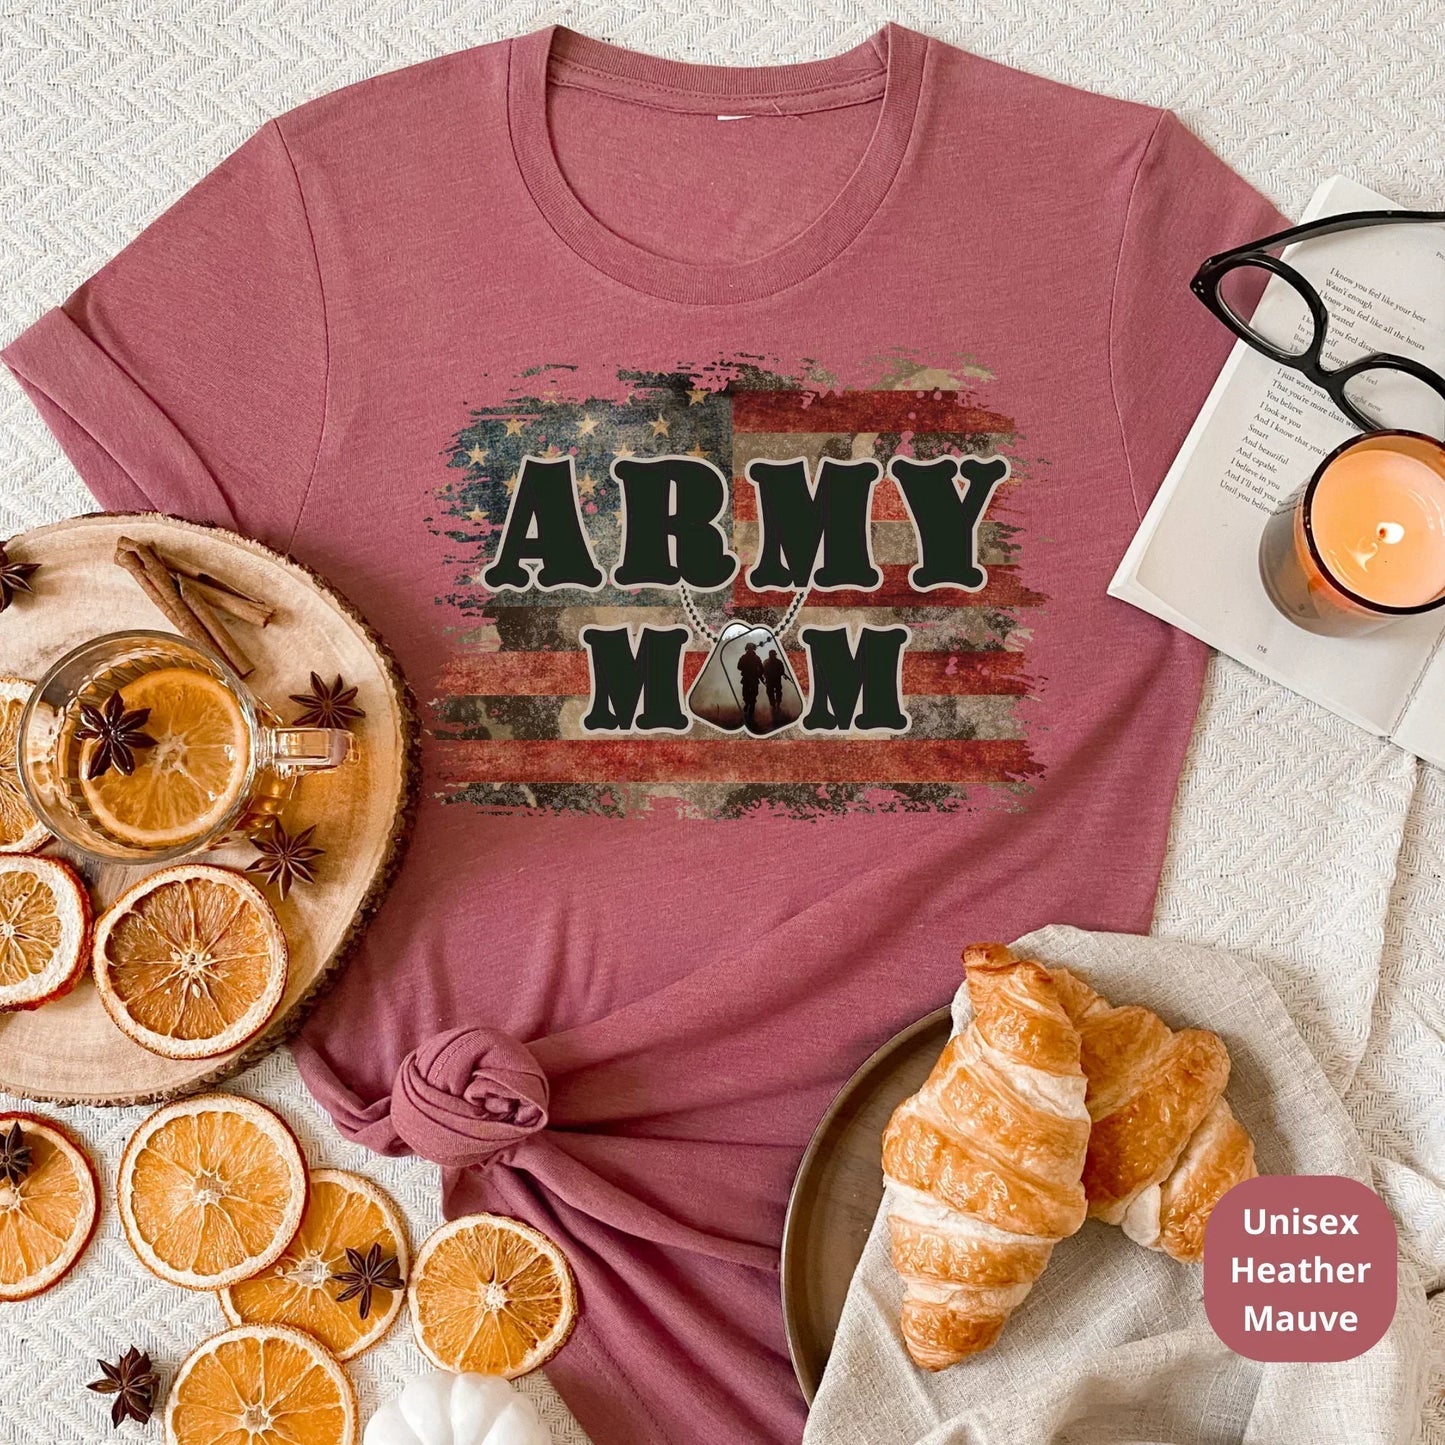 Army Mom Shirt, Military Mom Shirt, Military Wife Sweatshirt, Army Mom Gift, Air Force Mom, Support our troops, Marine Coast guard, Navy Mom HMDesignStudioUS